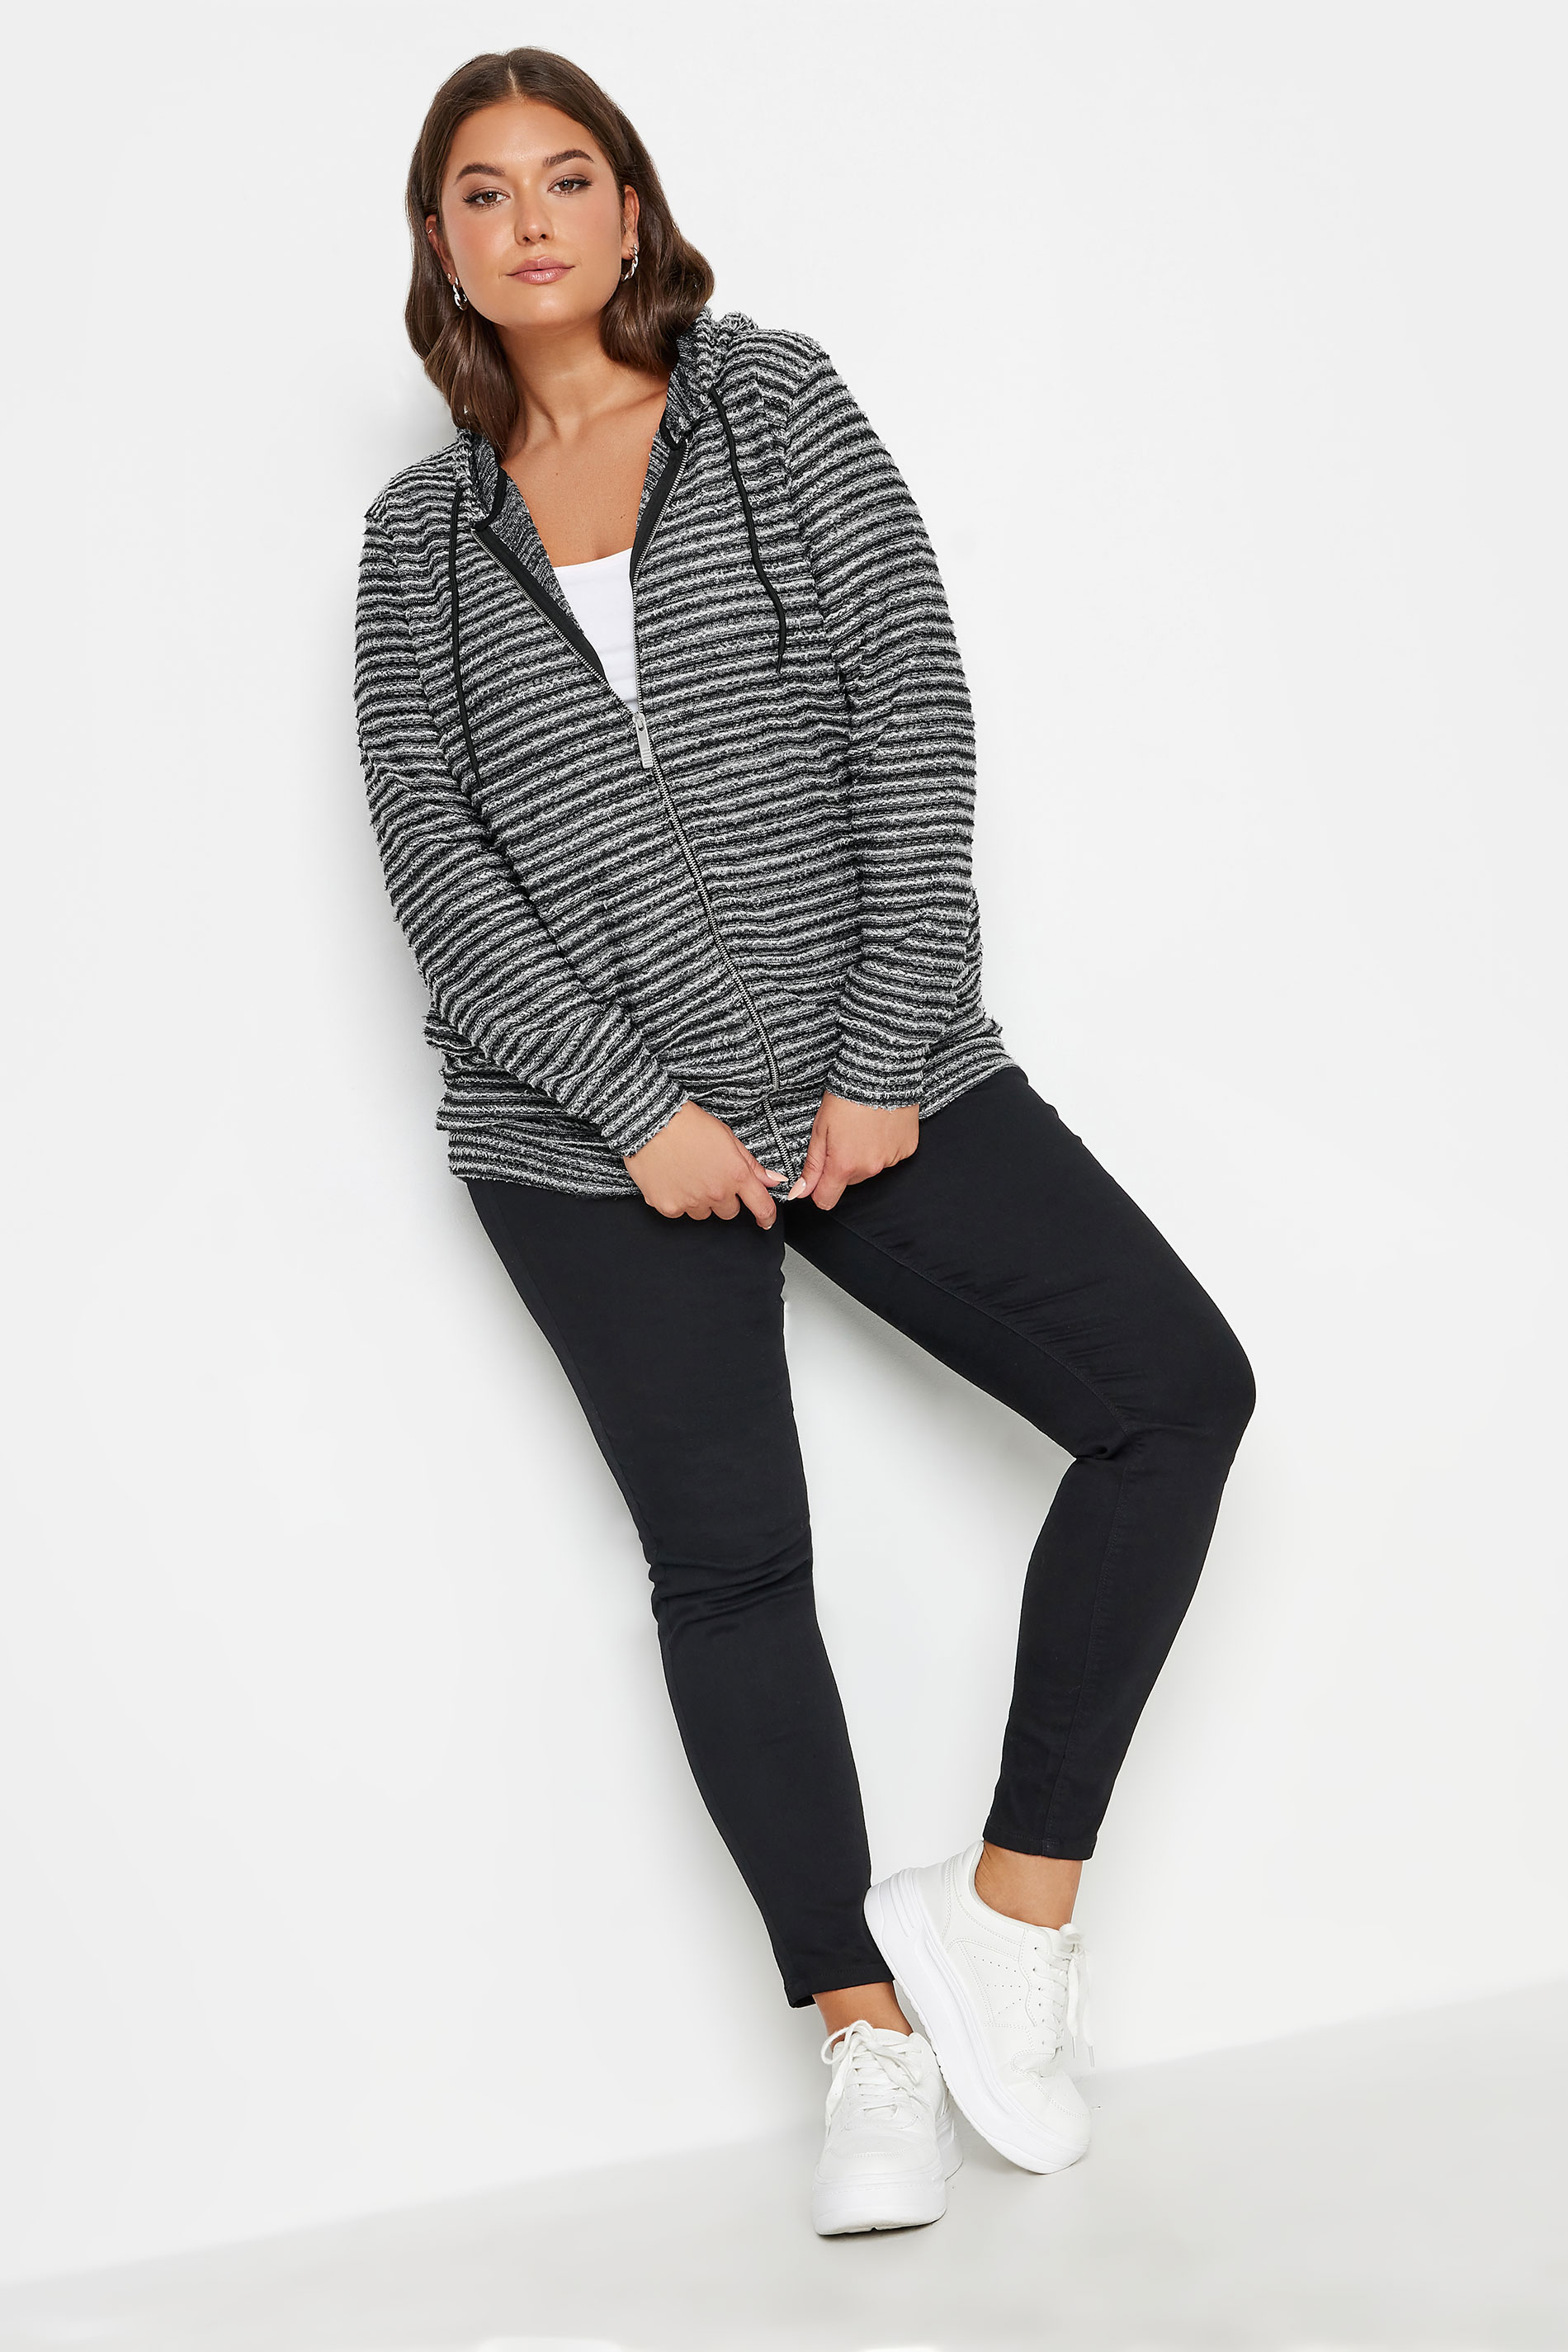 YOURS Plus Size Black & White Textured Knit Zip Up Hoodie | Yours Clothing 2